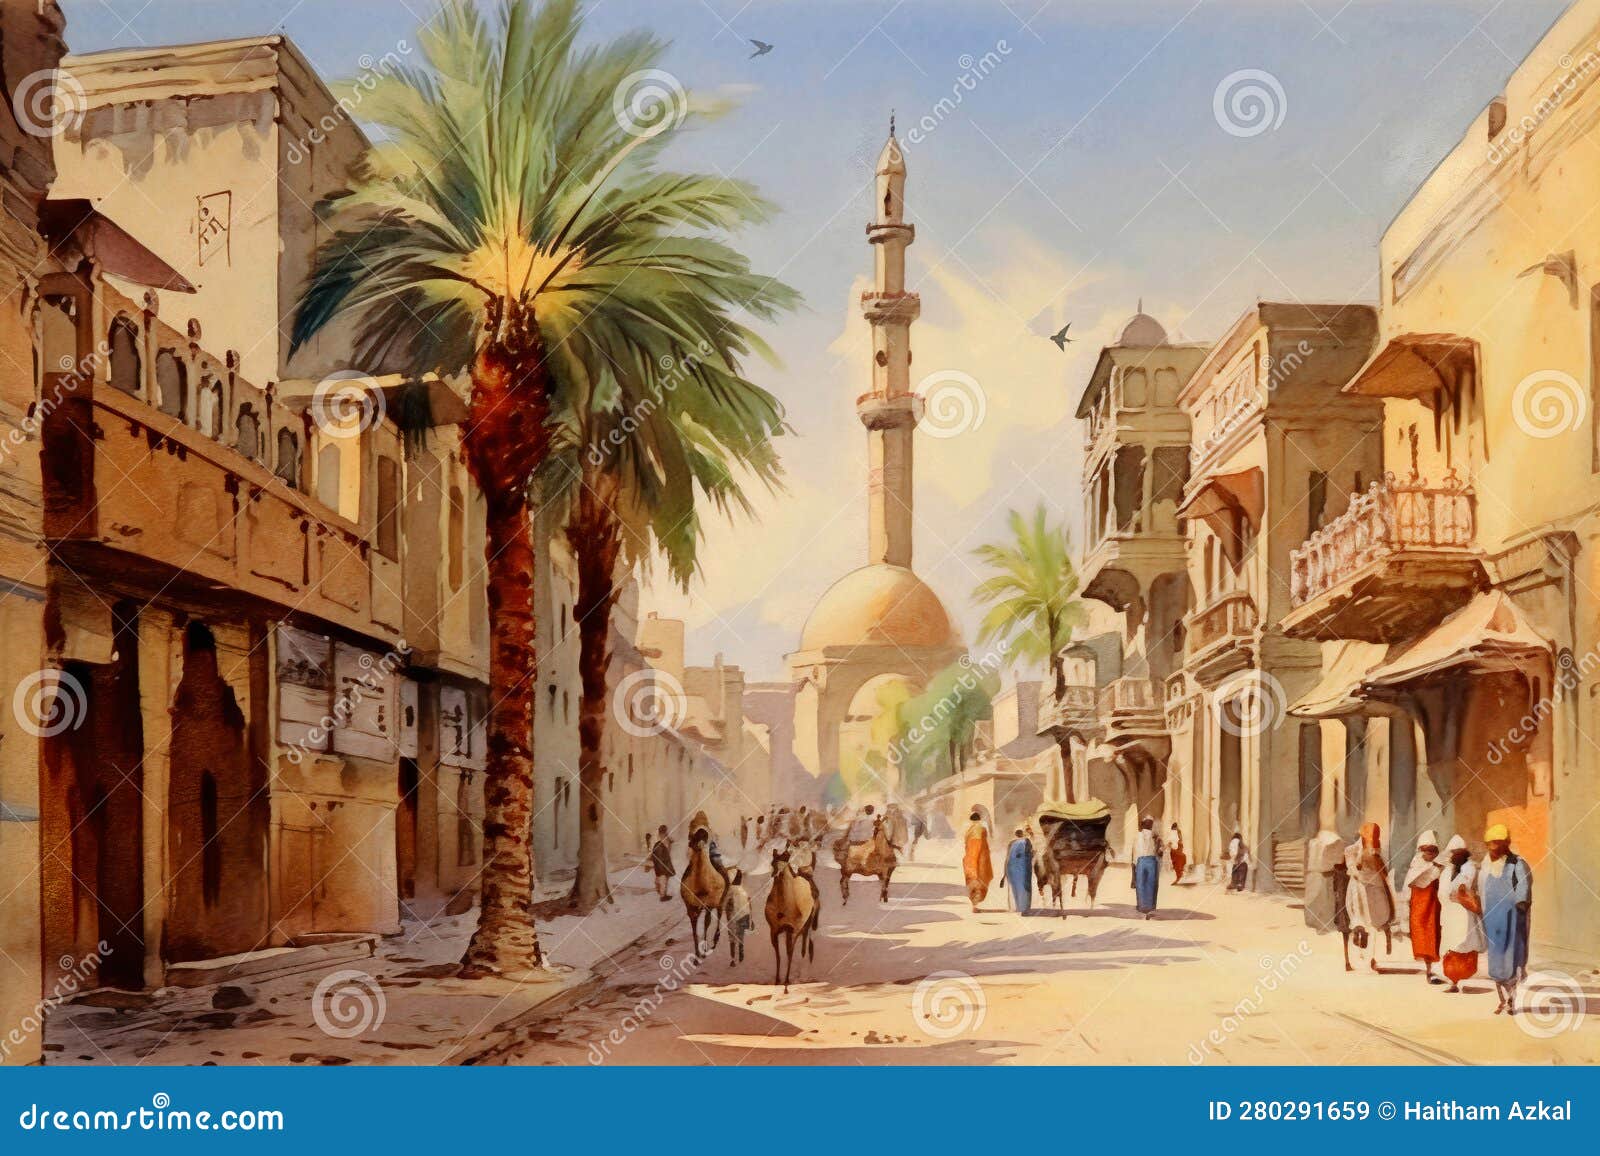 drawing in watercolors, wallpaper, landscape, streets of ancient egypt, where the houses, minarets and markets